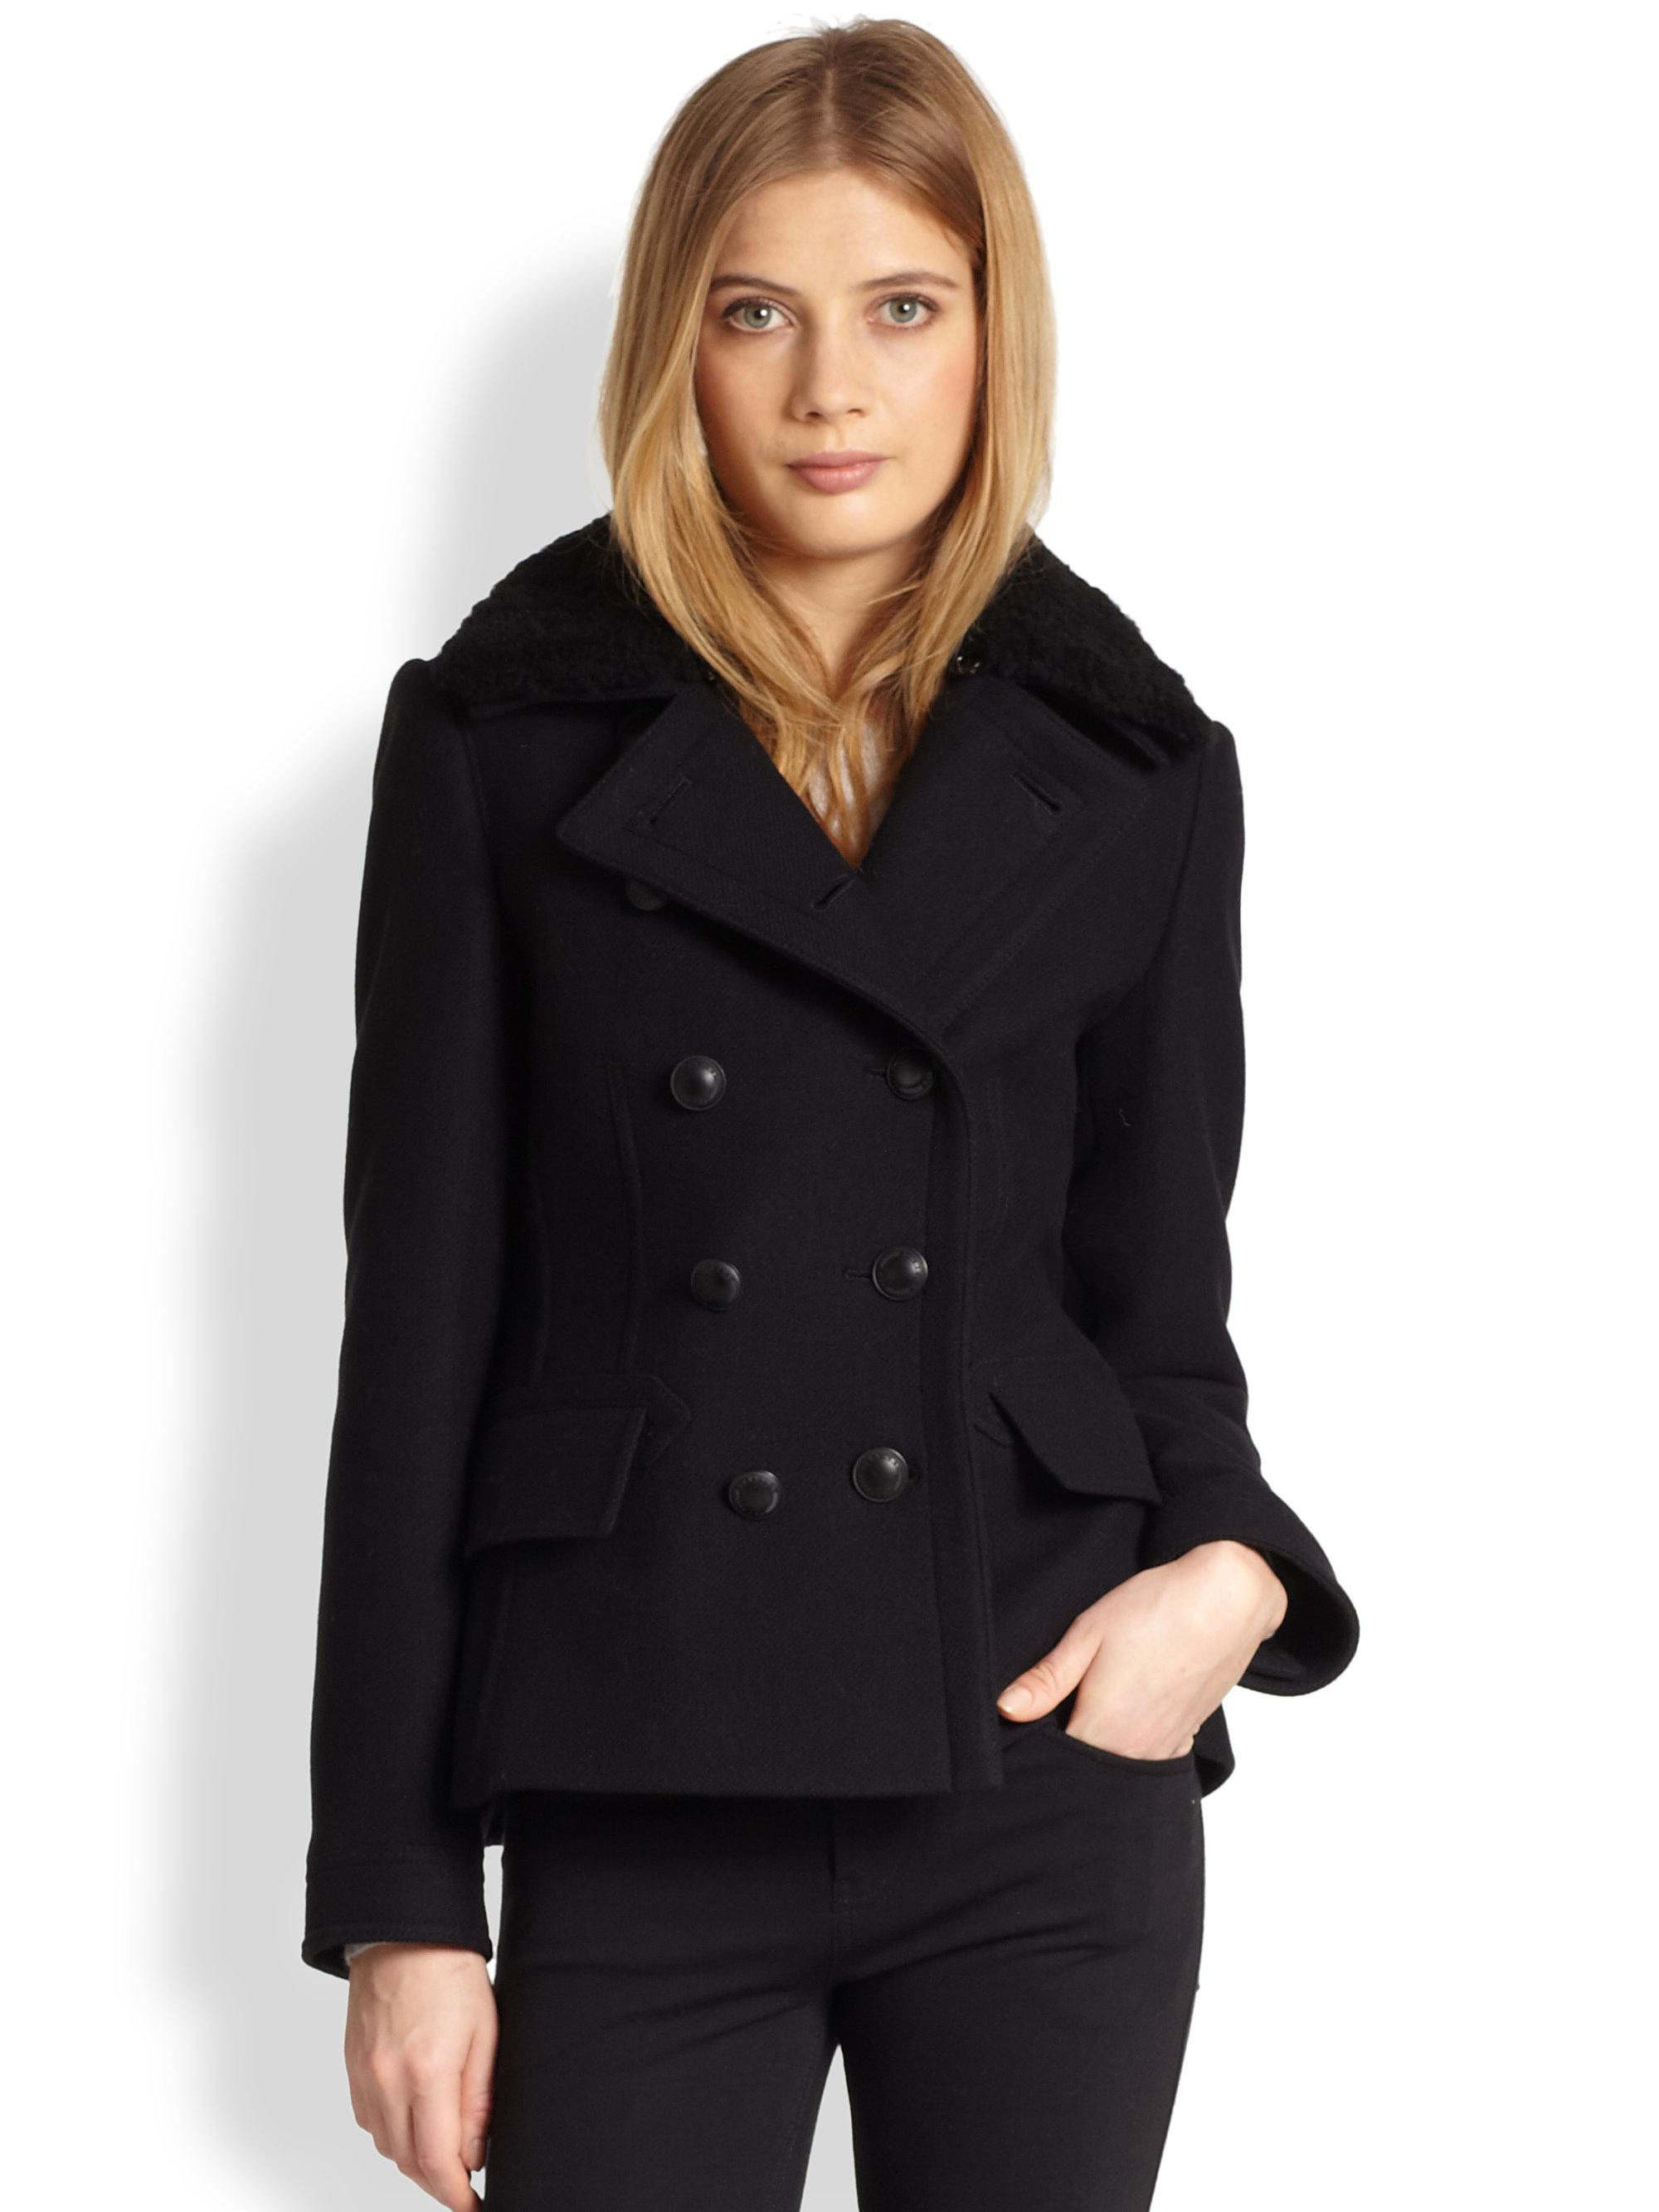 Lyst - Burberry brit Shearlingcollared Short Peacoat in Black